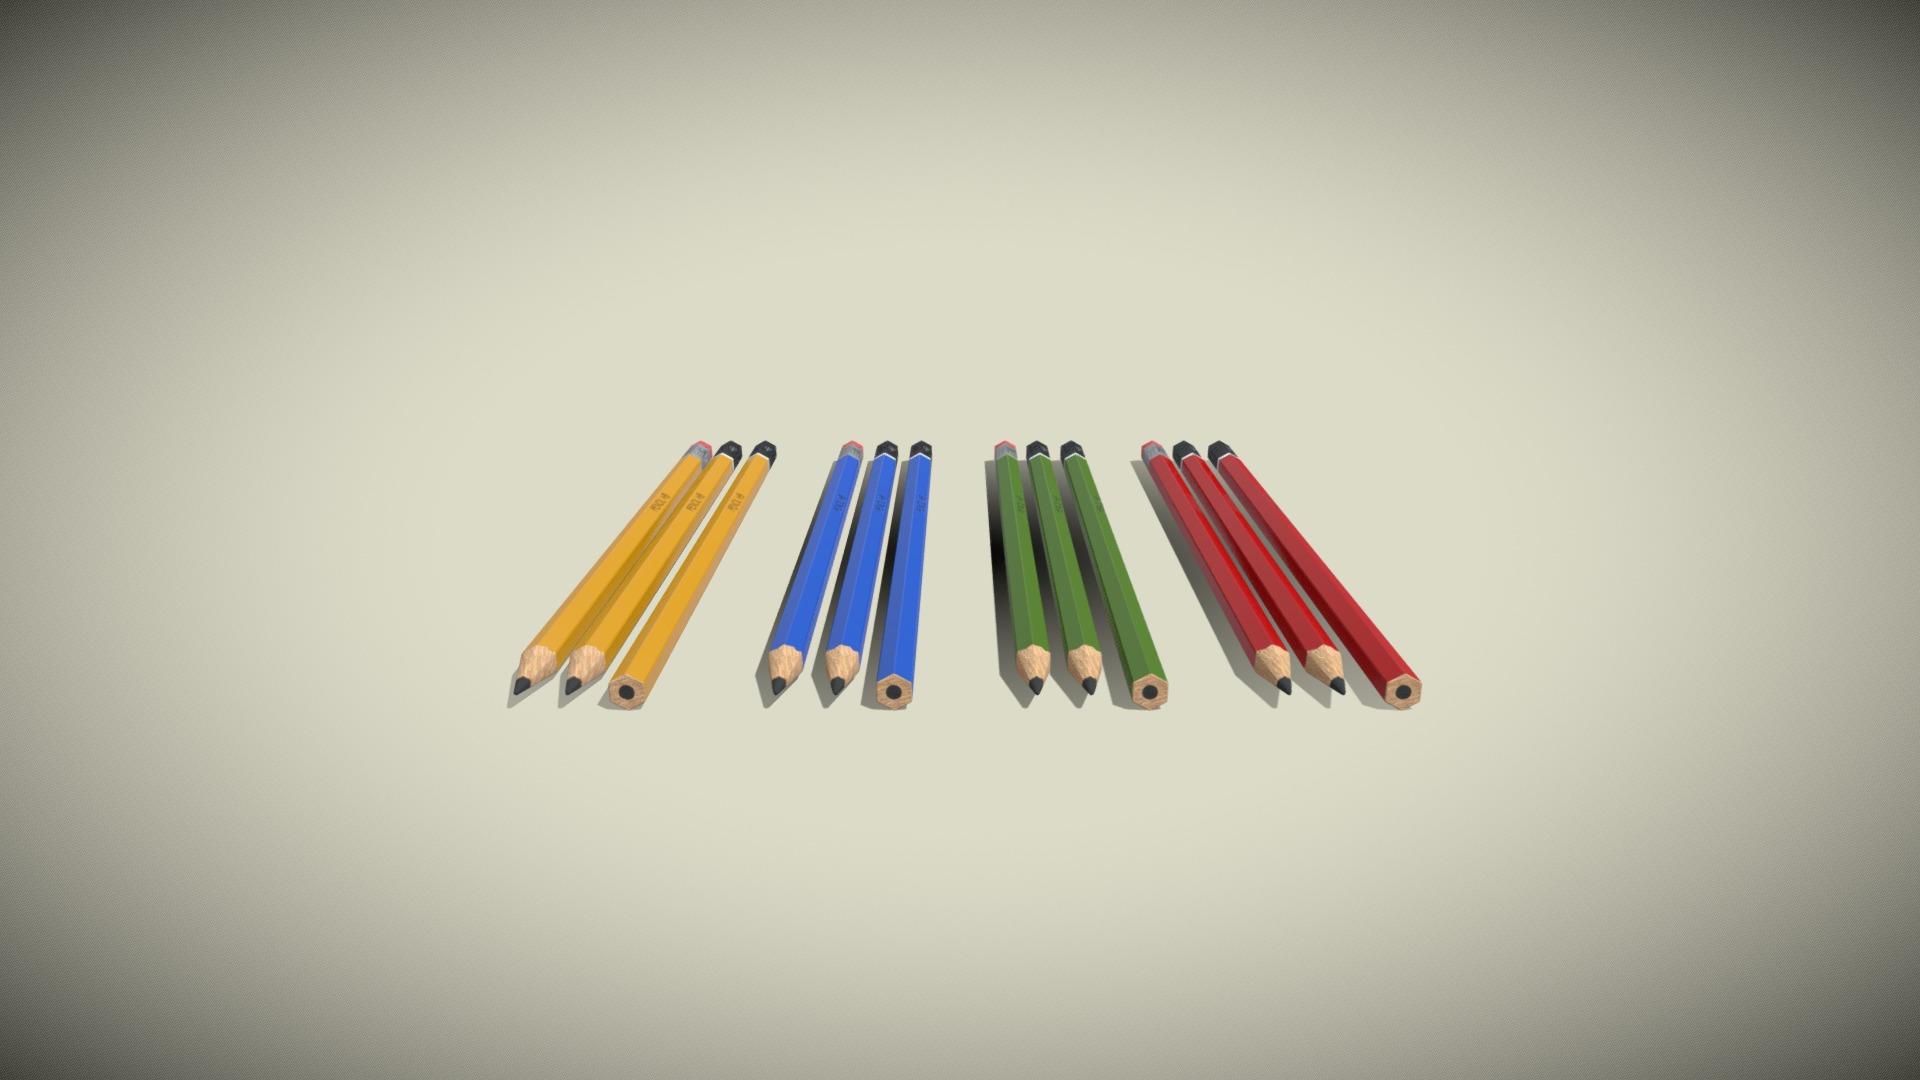 3D model Graphite Pencils 3D Model - This is a 3D model of the Graphite Pencils 3D Model. The 3D model is about a group of colorful pencils.